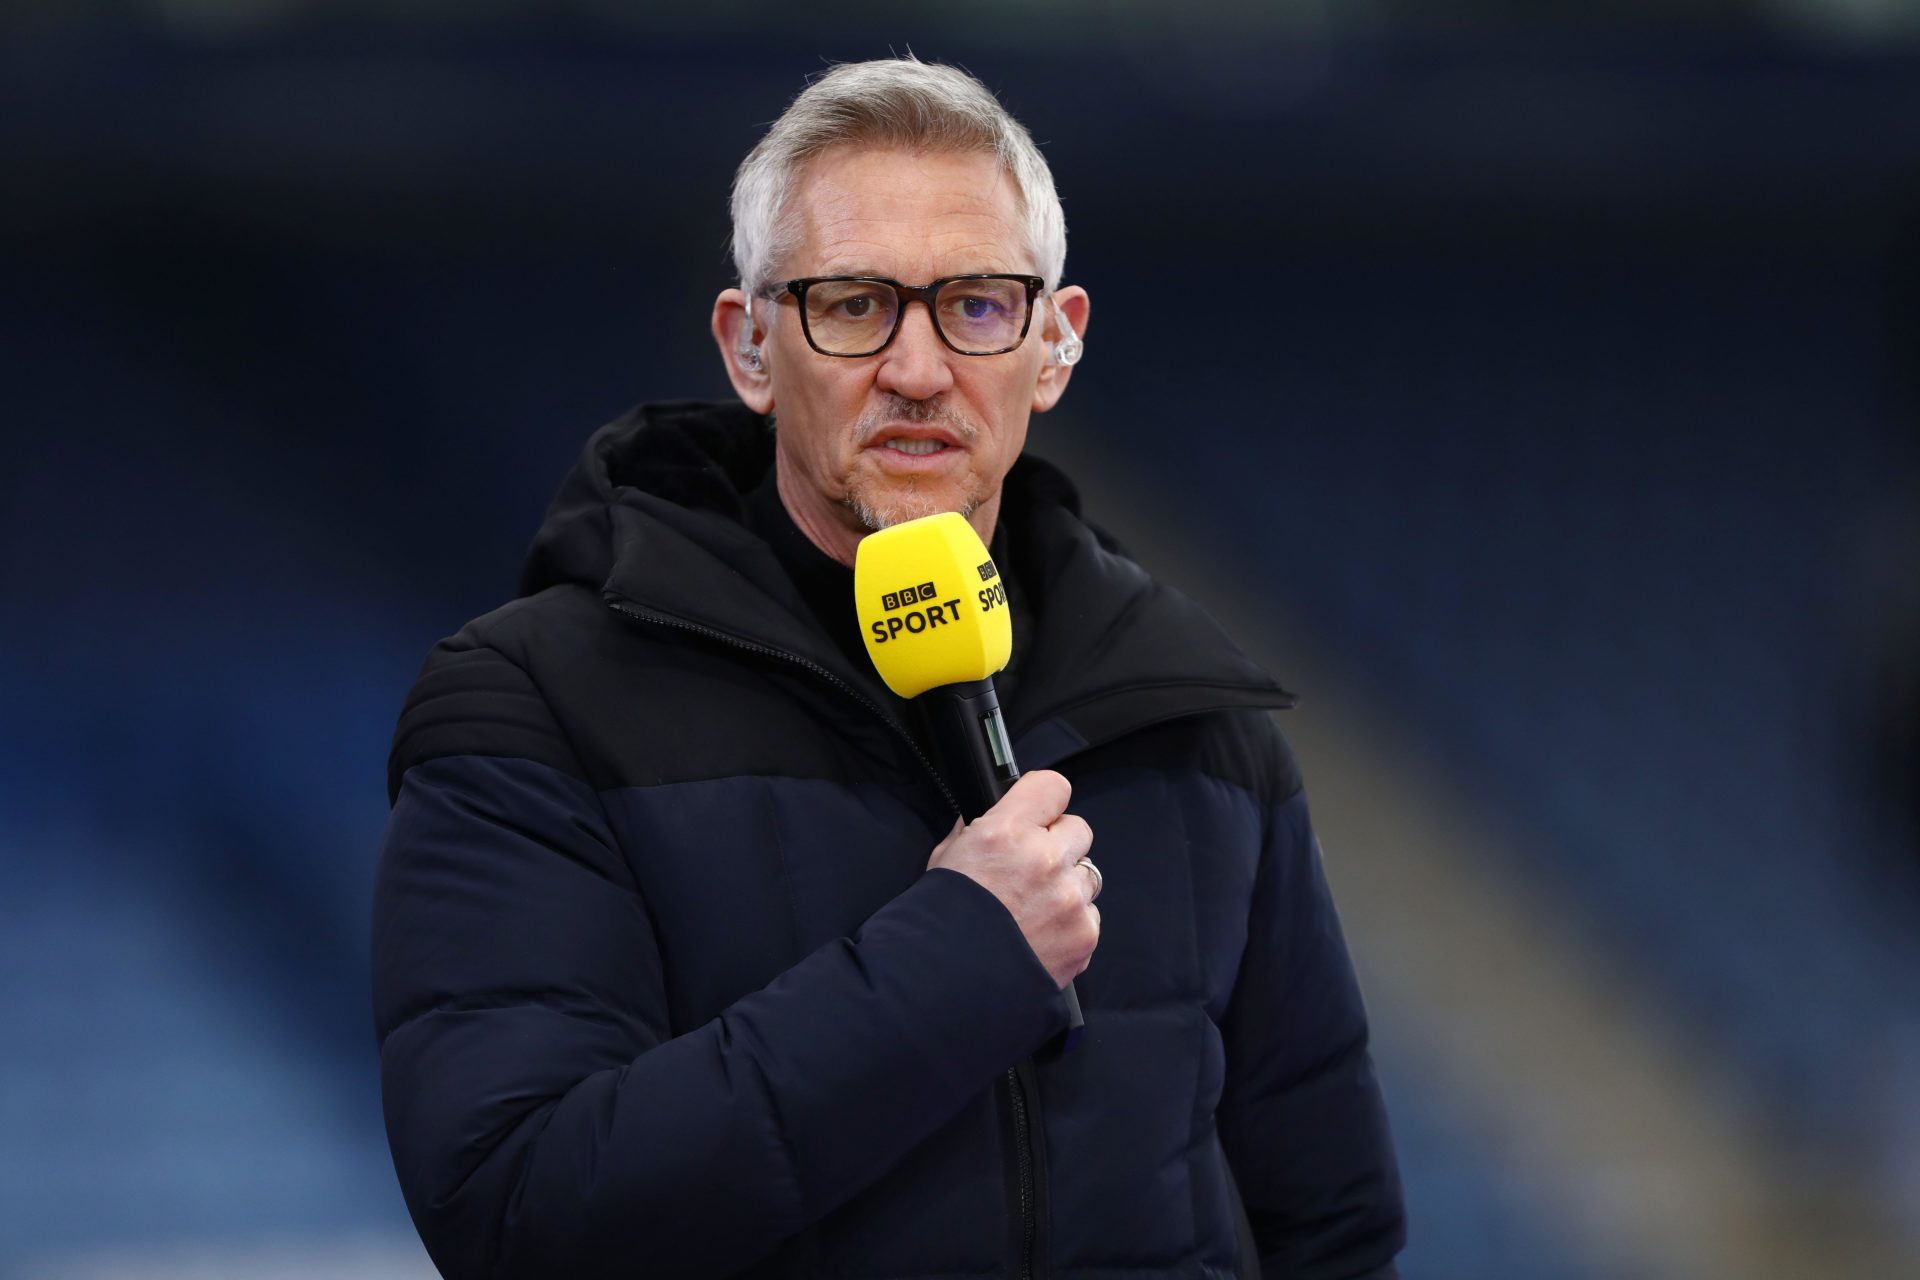 TV presenter Gary Lineker at the Leicester City v Manchester United match in March 2021